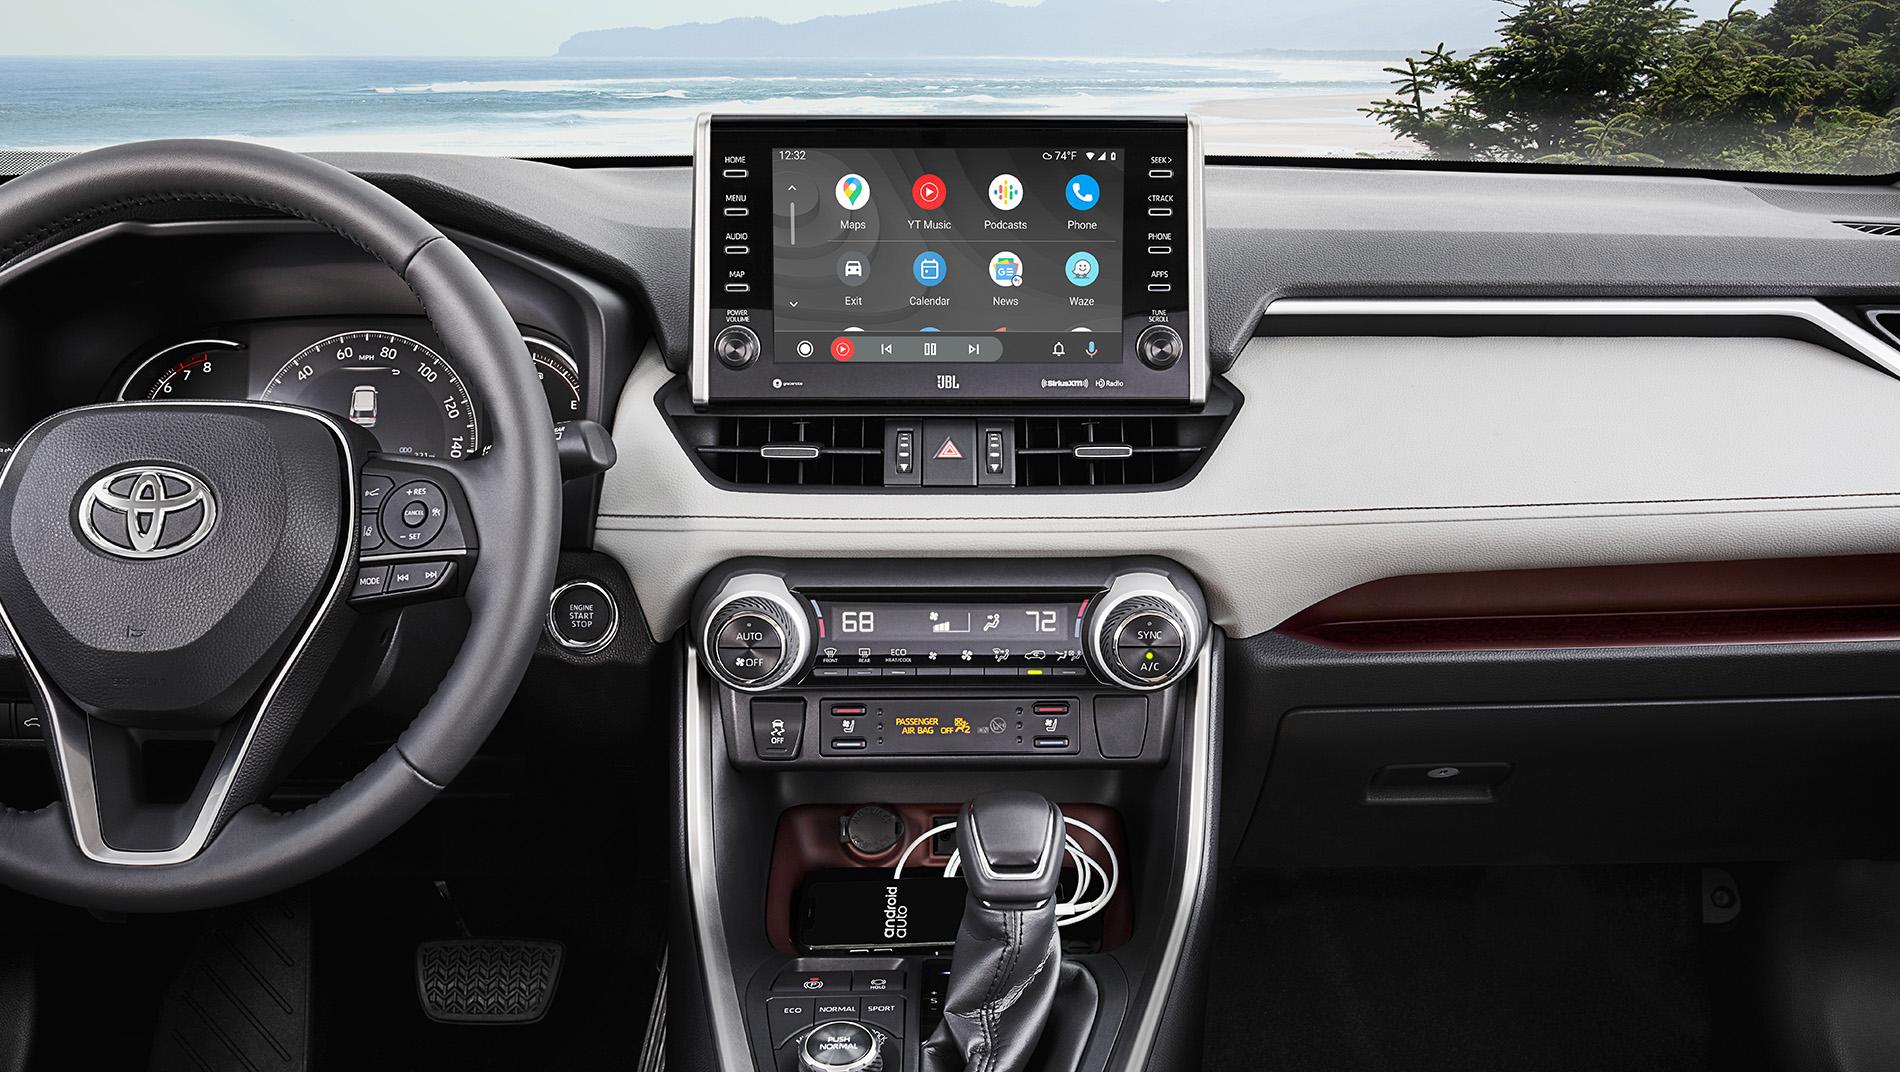 Toyota RAV4 interior with touchscreen and wireless charger